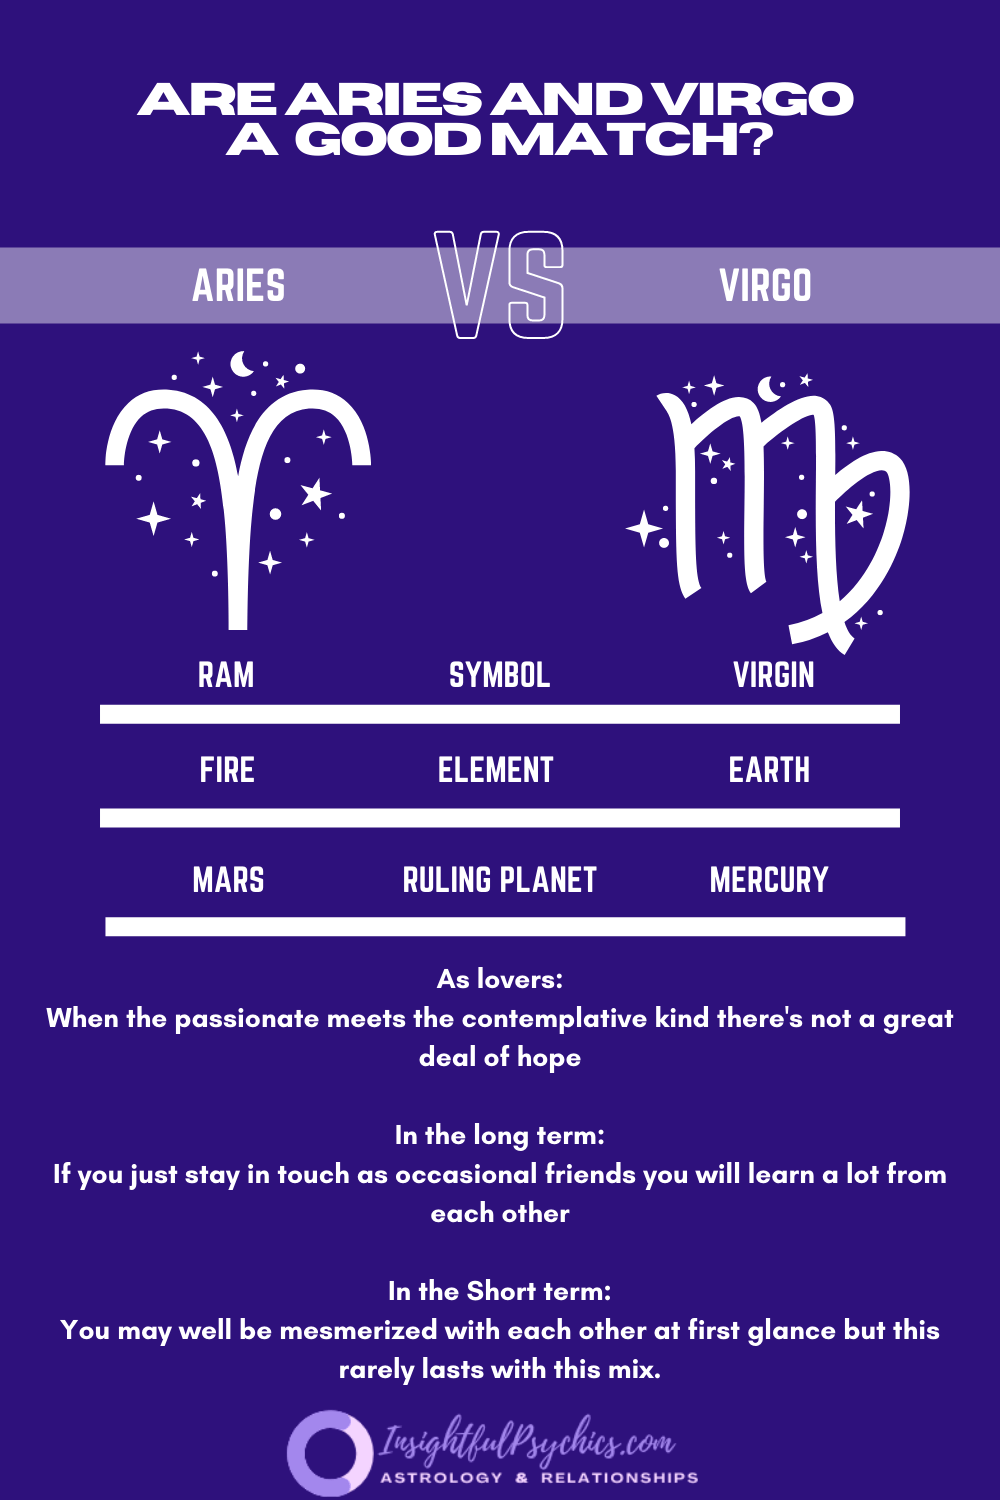 Communication And Conflict In Aries-Virgo Friendship